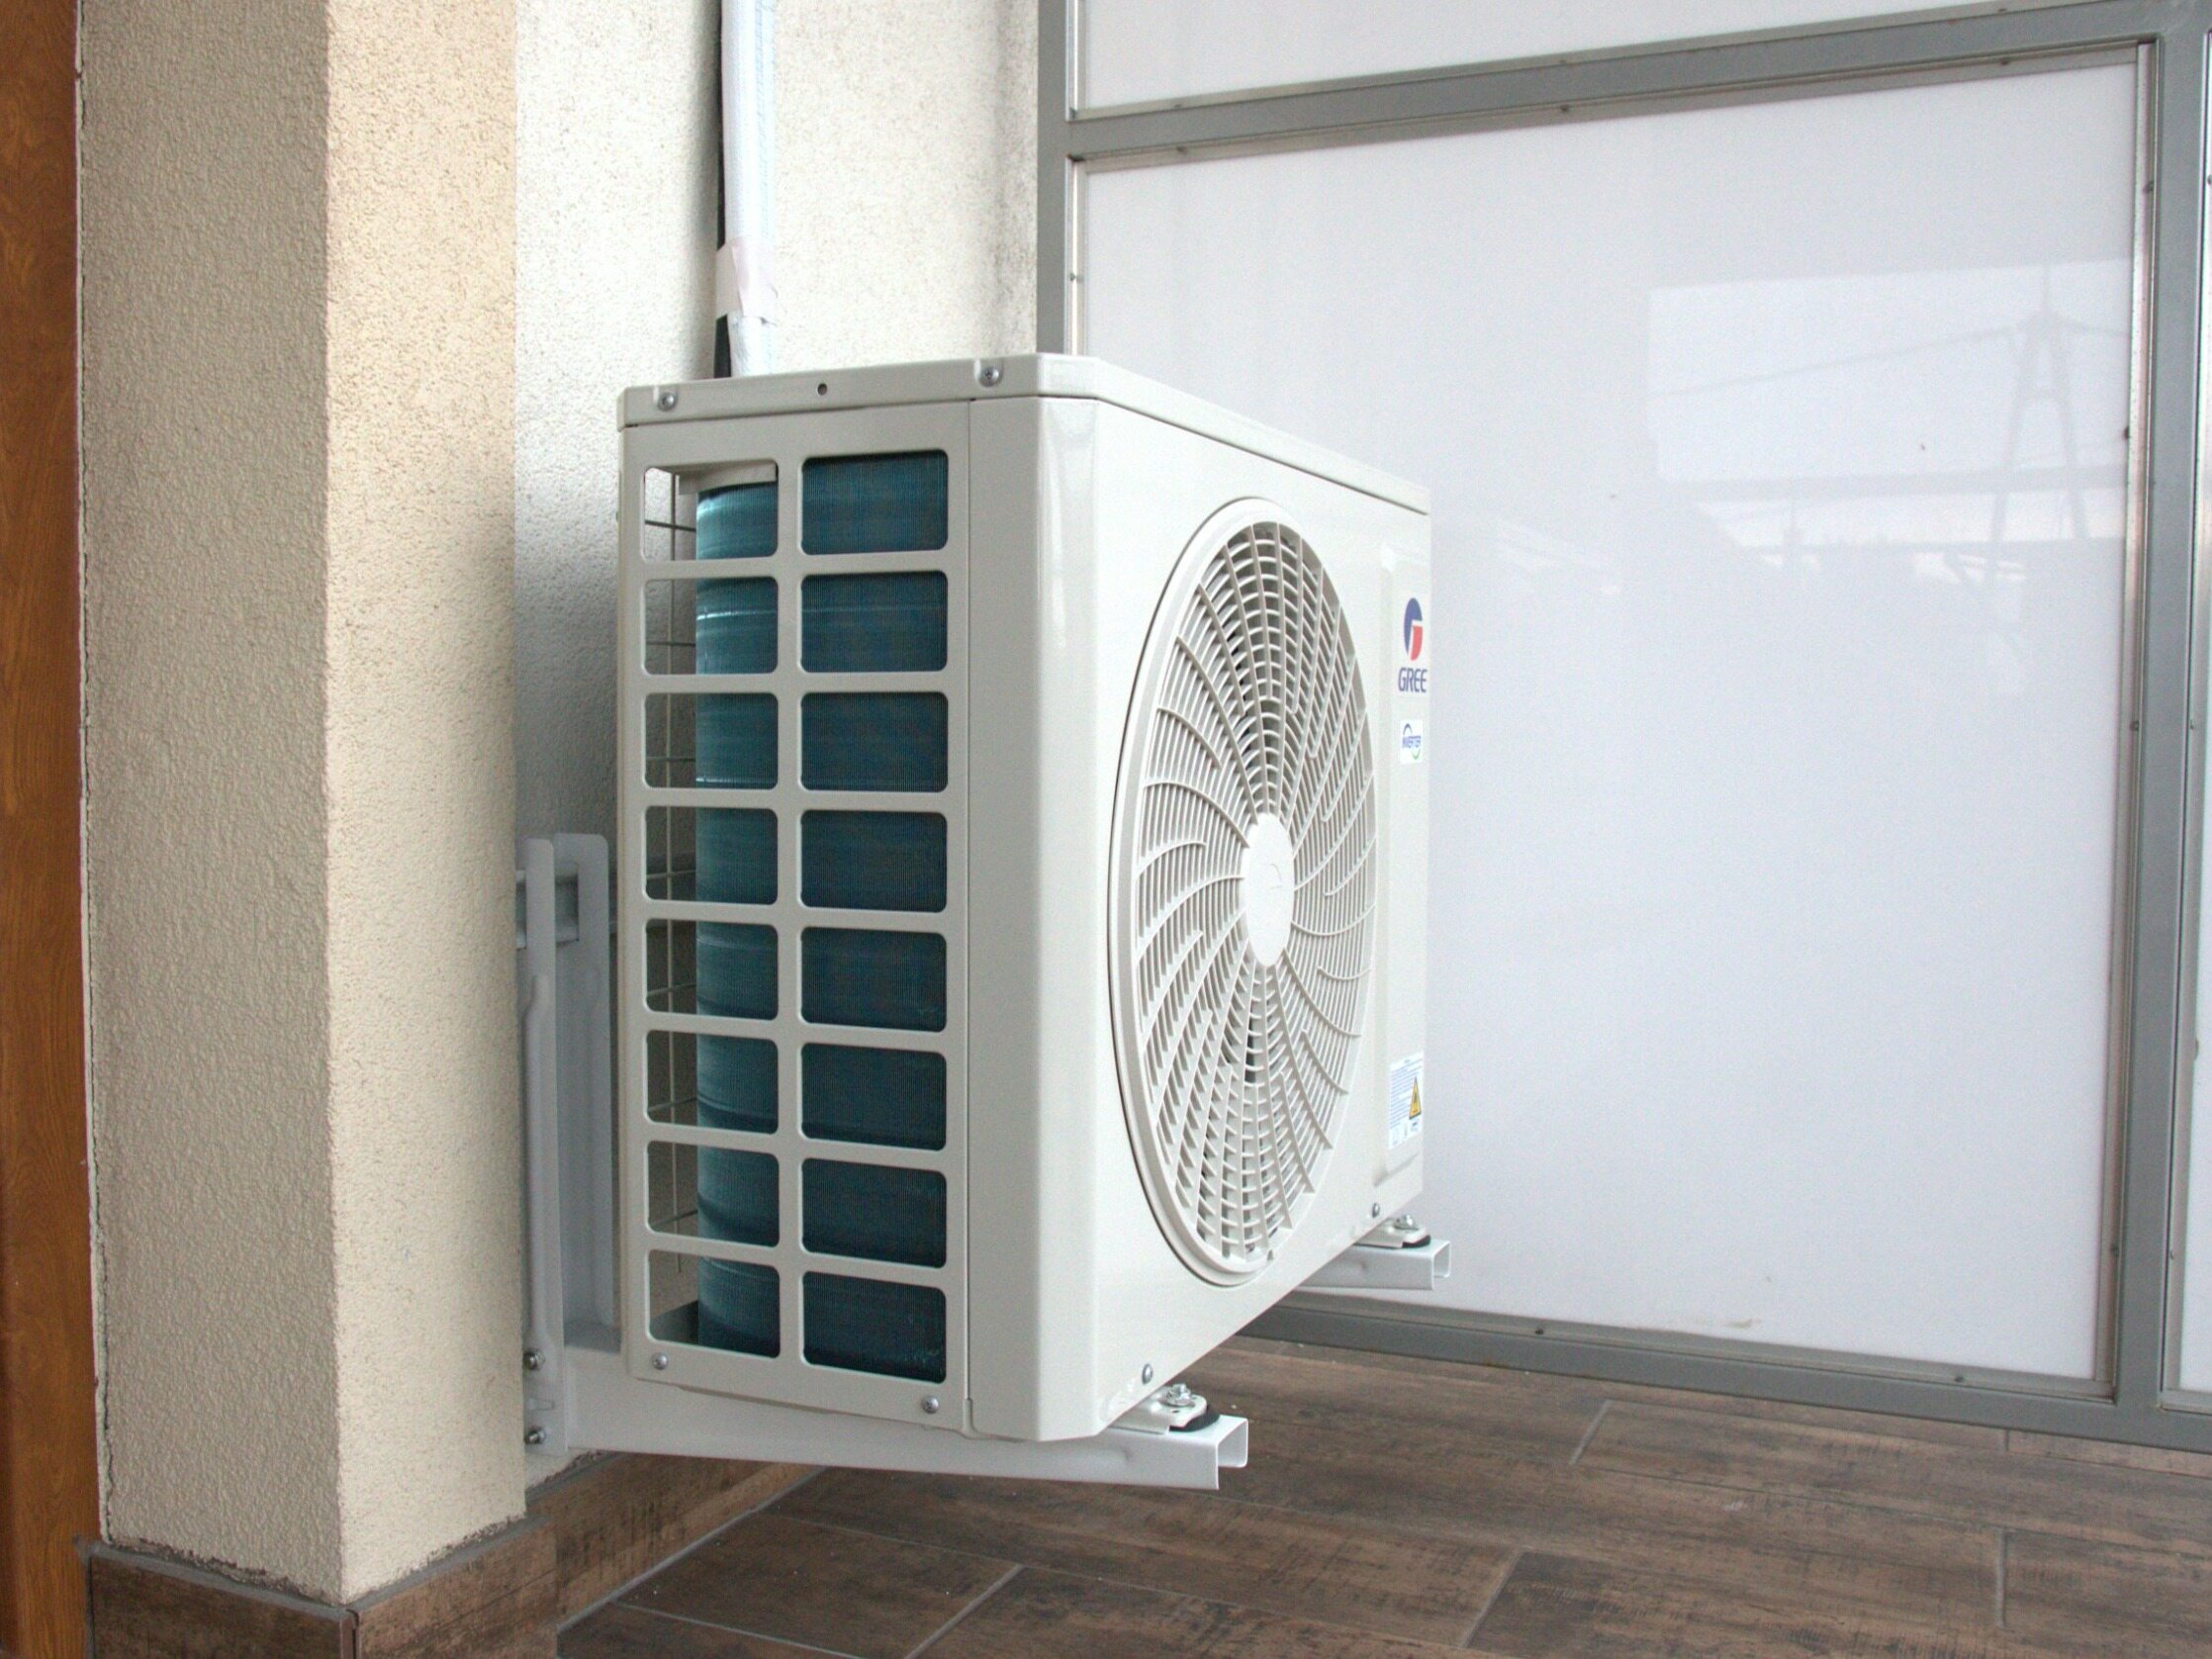 The heatwave will increase the demand for air conditioning.  Poland in the lead